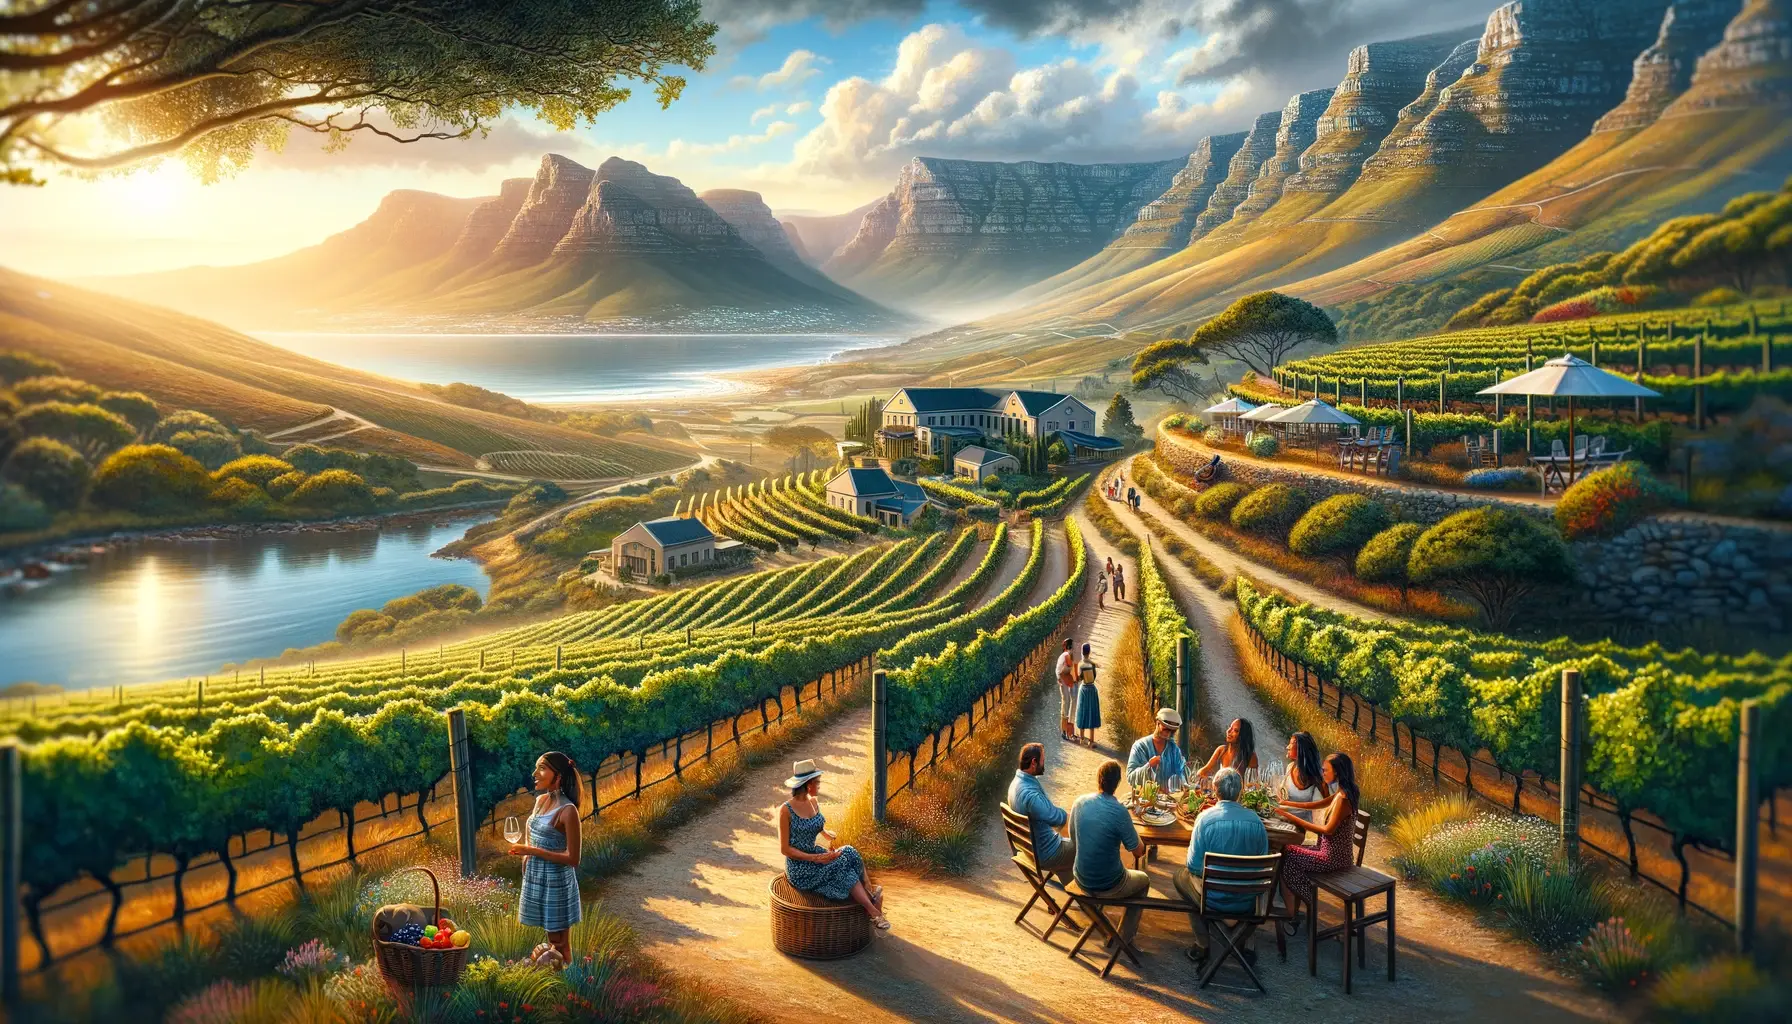 A picturesque and serene image of Cape Point Vineyards in Cape Town